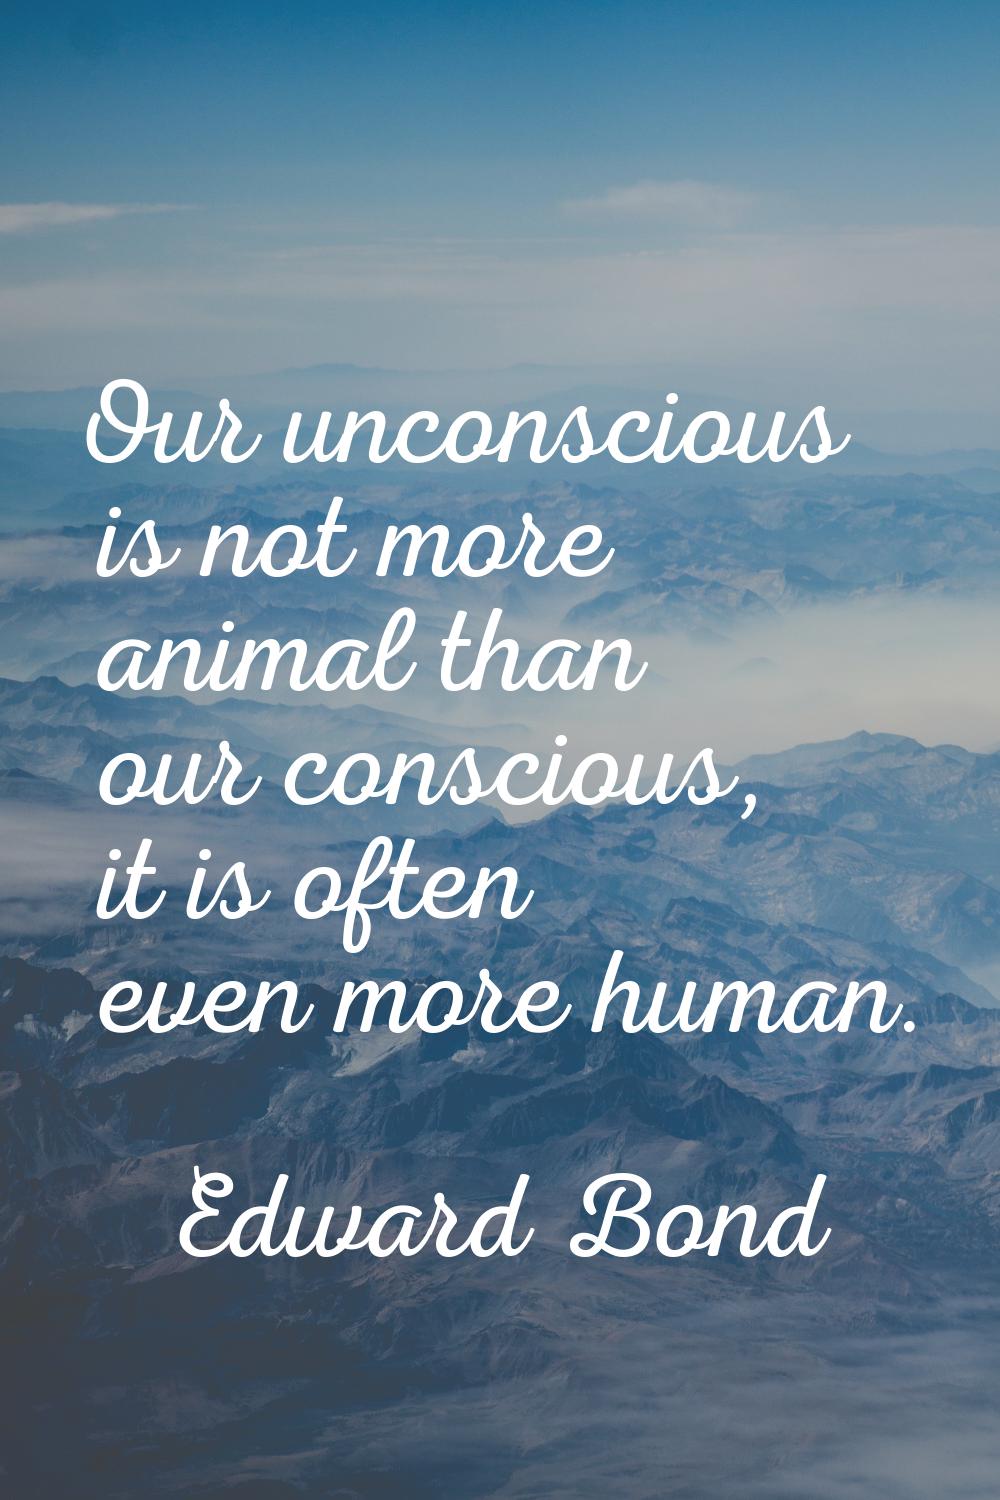 Our unconscious is not more animal than our conscious, it is often even more human.